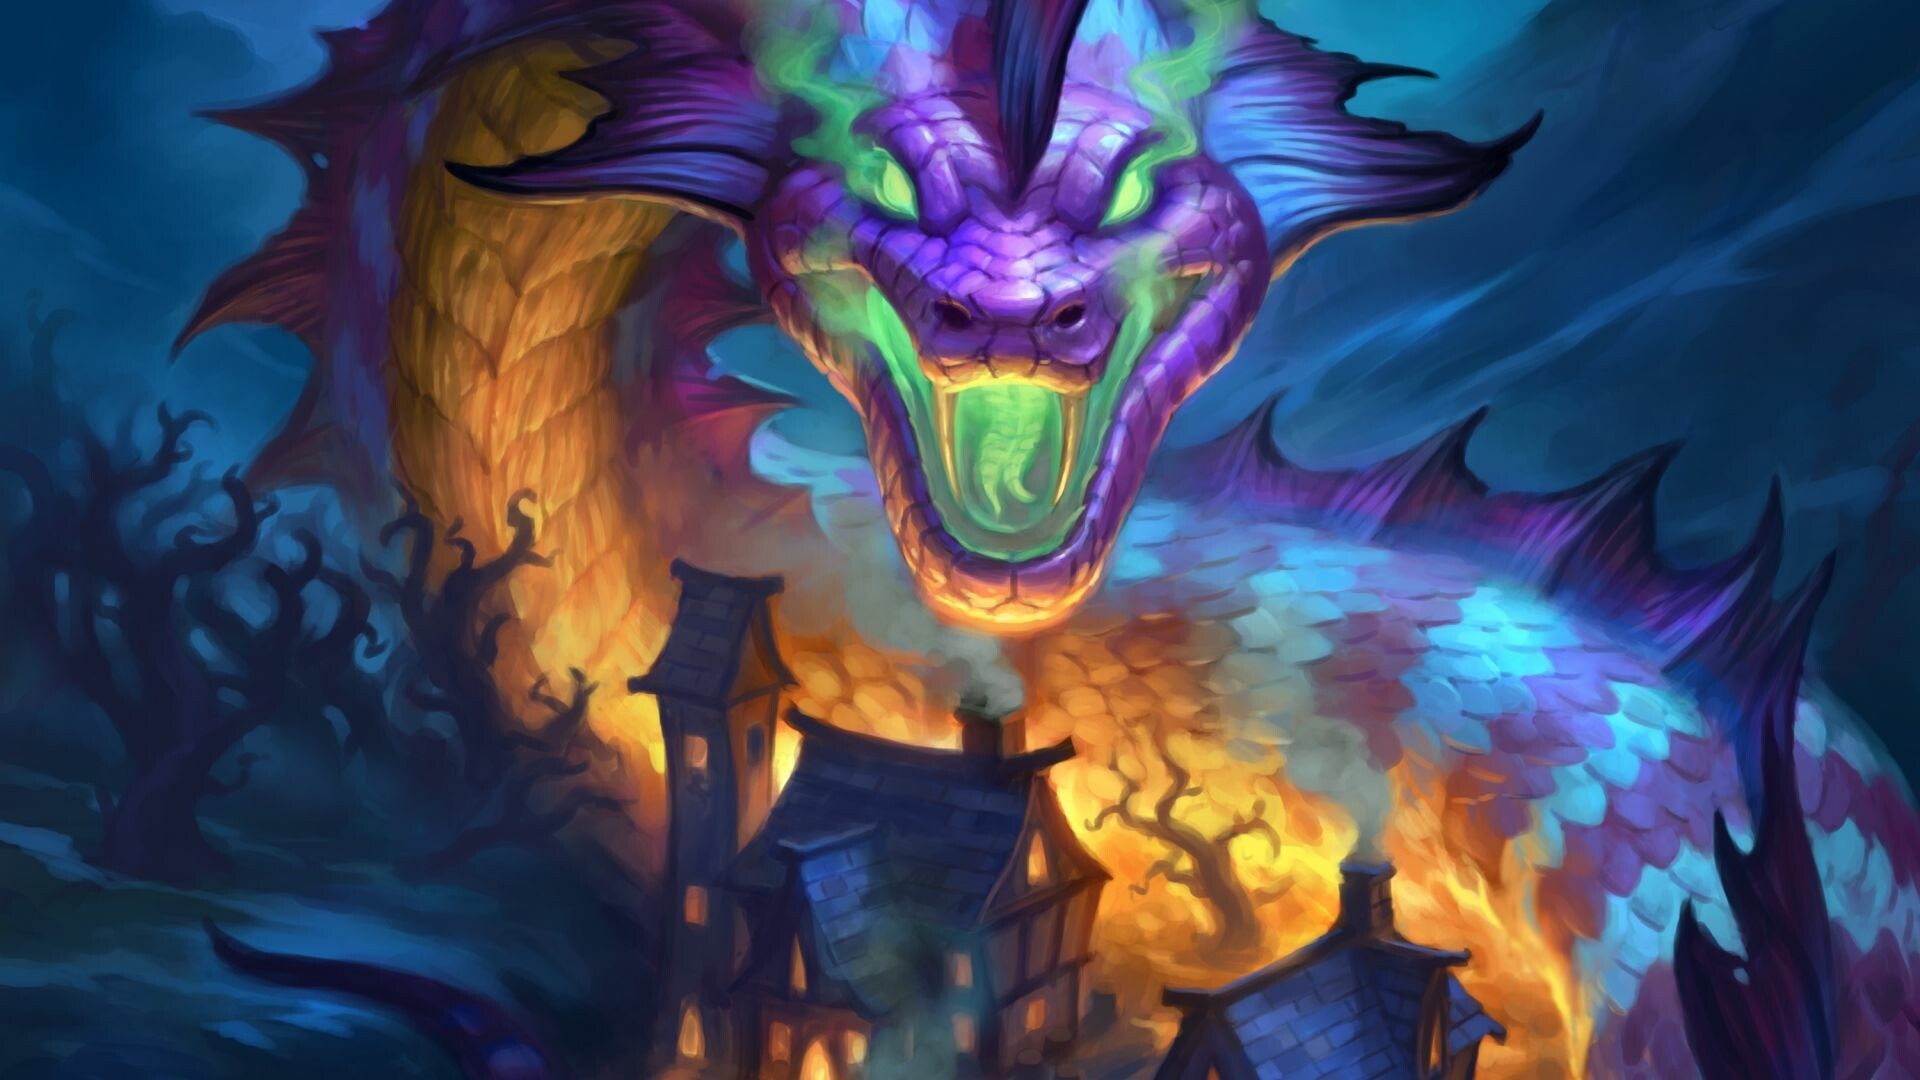 Dragon from The Witchwood, Bewitching card game, Artistic wallpaper, Mythical creatures, 1920x1080 Full HD Desktop